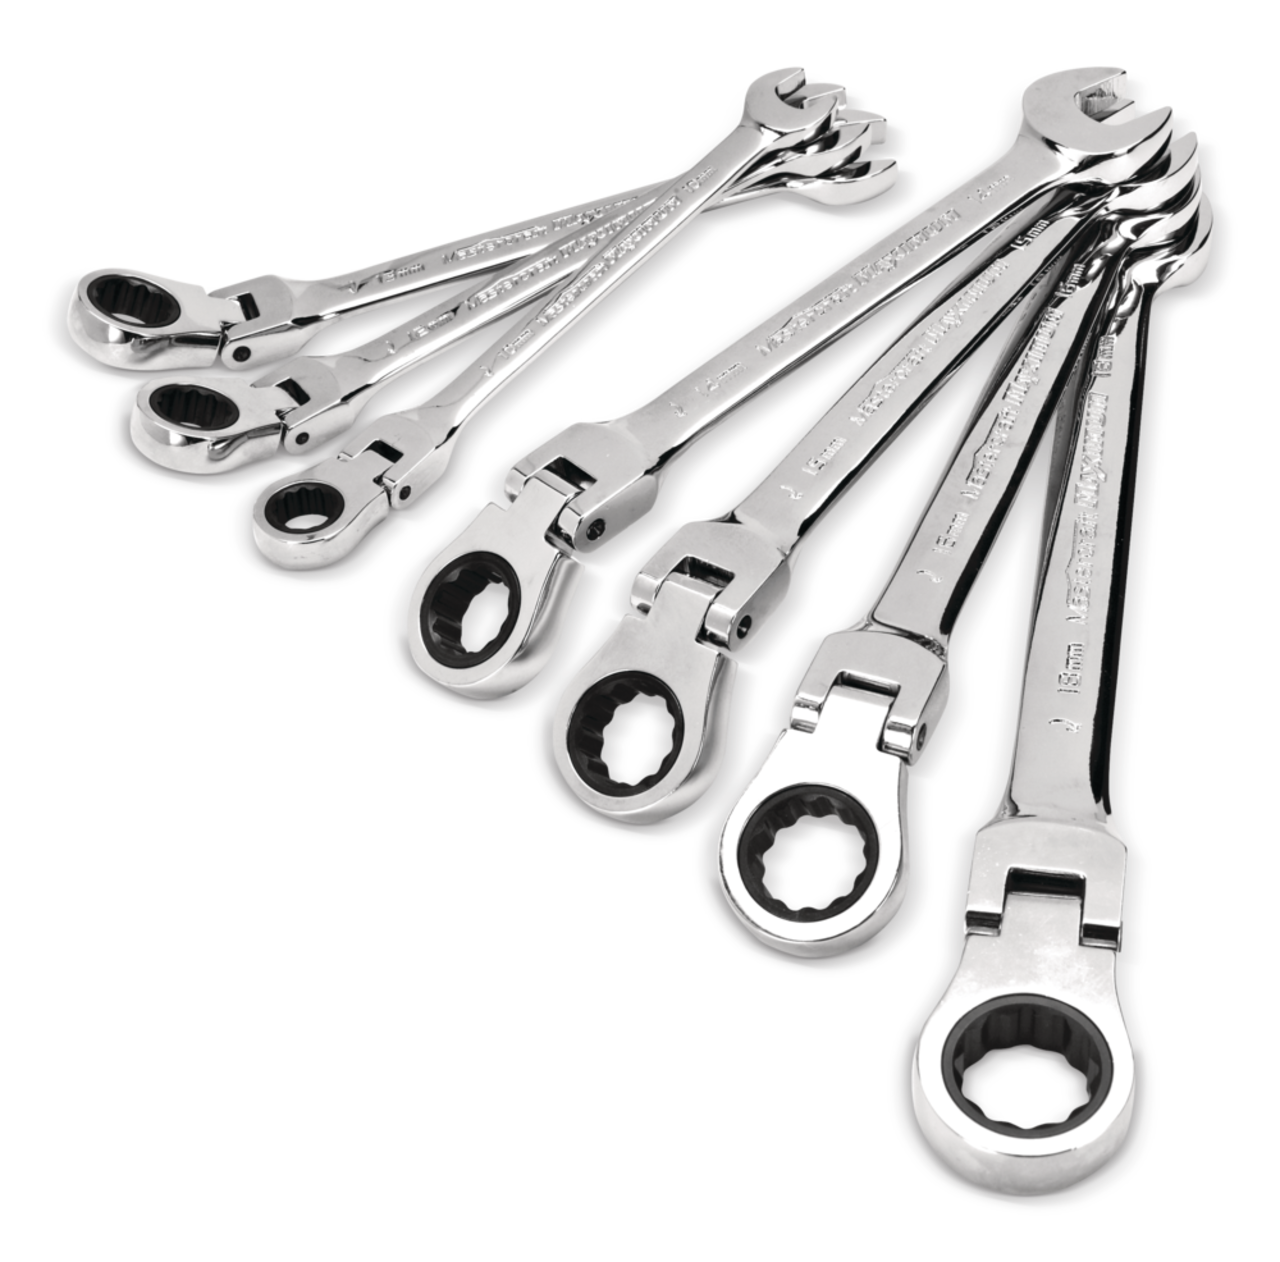 https://media-www.canadiantire.ca/product/fixing/tools/sockets-wrenches/0588587/maximum-7-piece-flex-head-wrench-metric-c93ab413-ee54-4753-82c8-592618a2746b.png?imdensity=1&imwidth=640&impolicy=mZoom